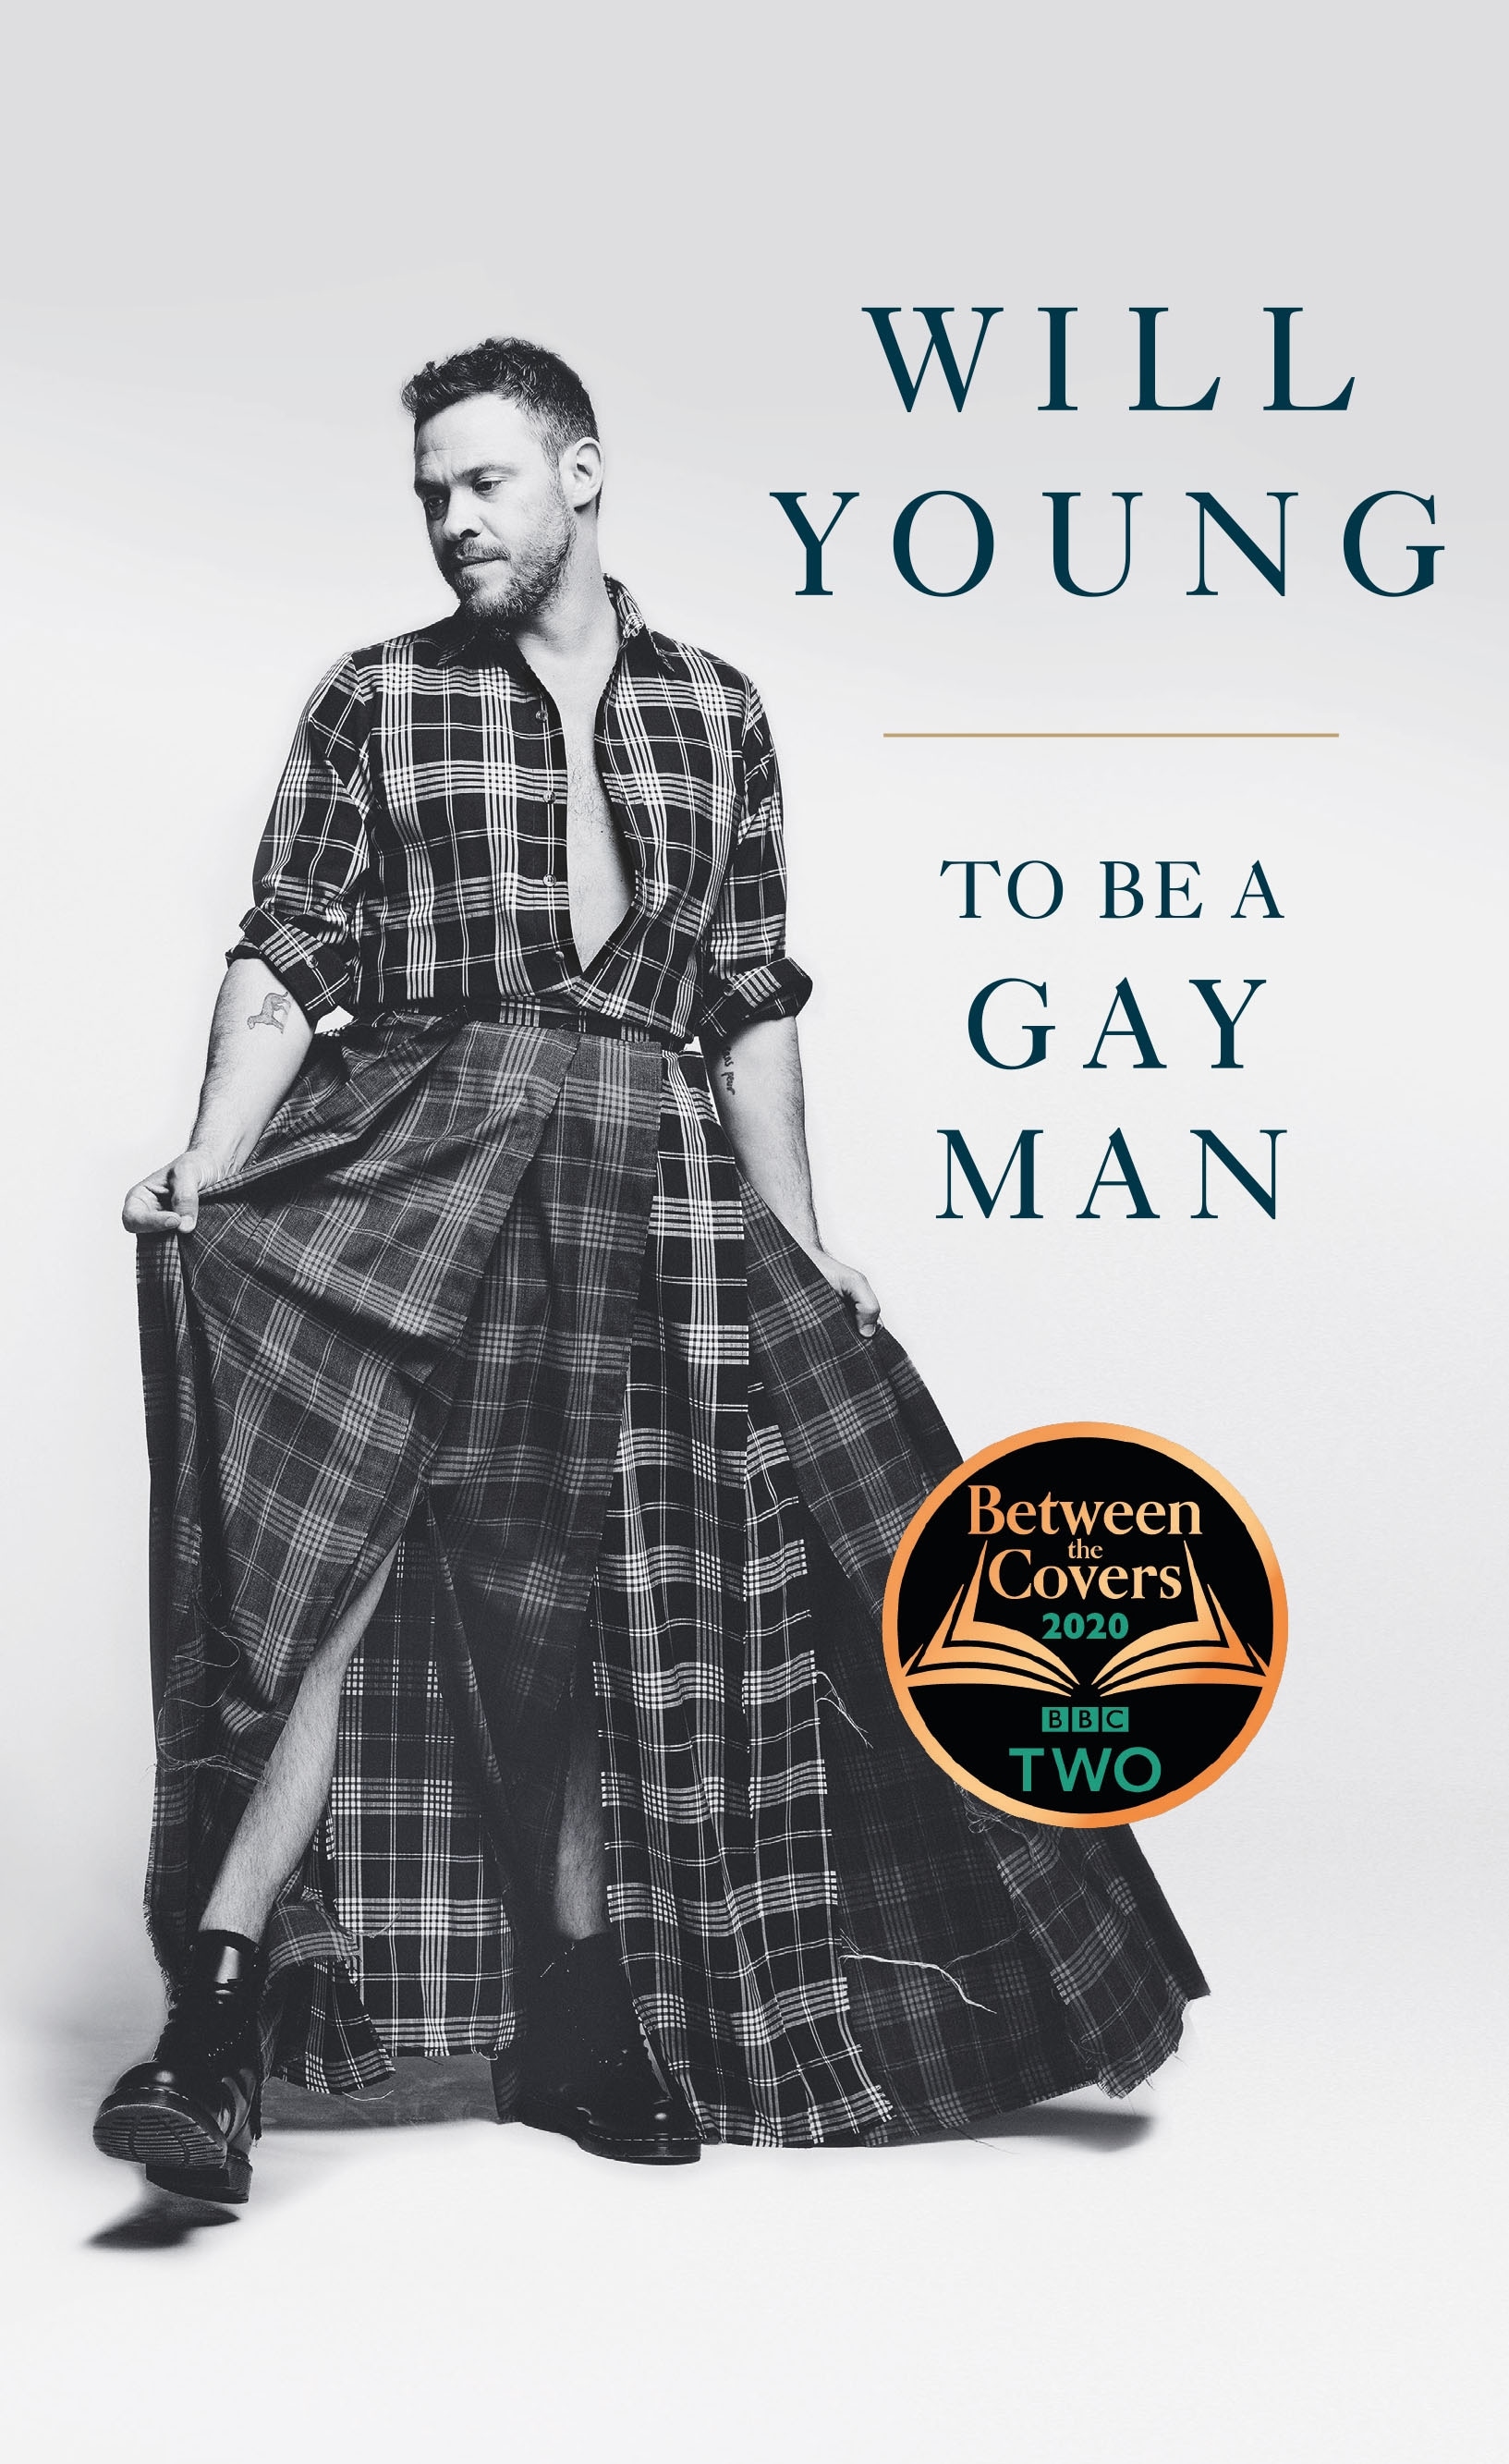 Book “To be a Gay Man” by Will Young — September 3, 2020